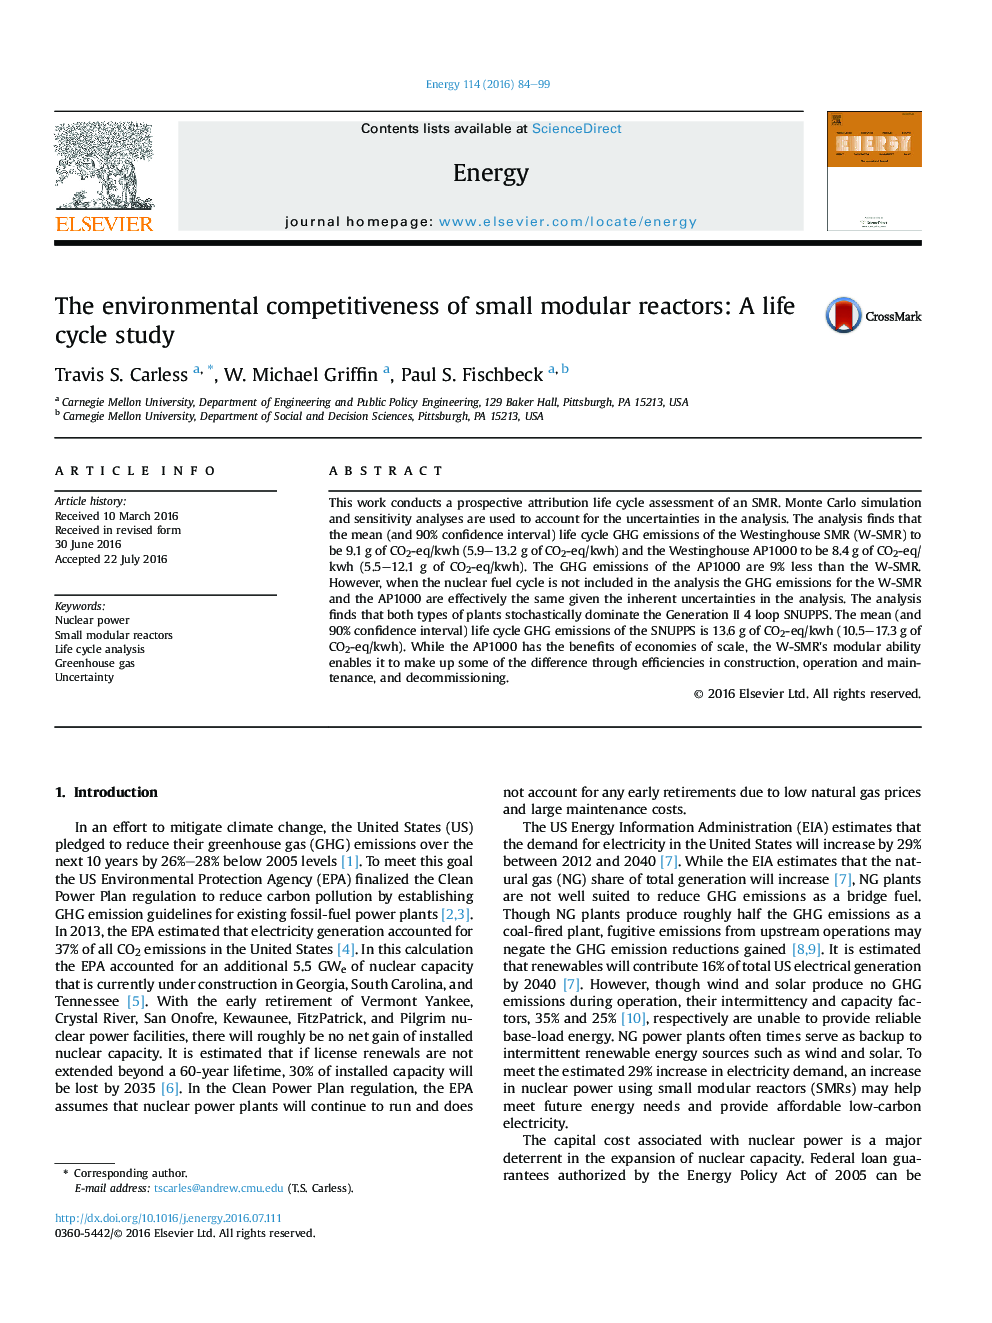 The environmental competitiveness of small modular reactors: A life cycle study